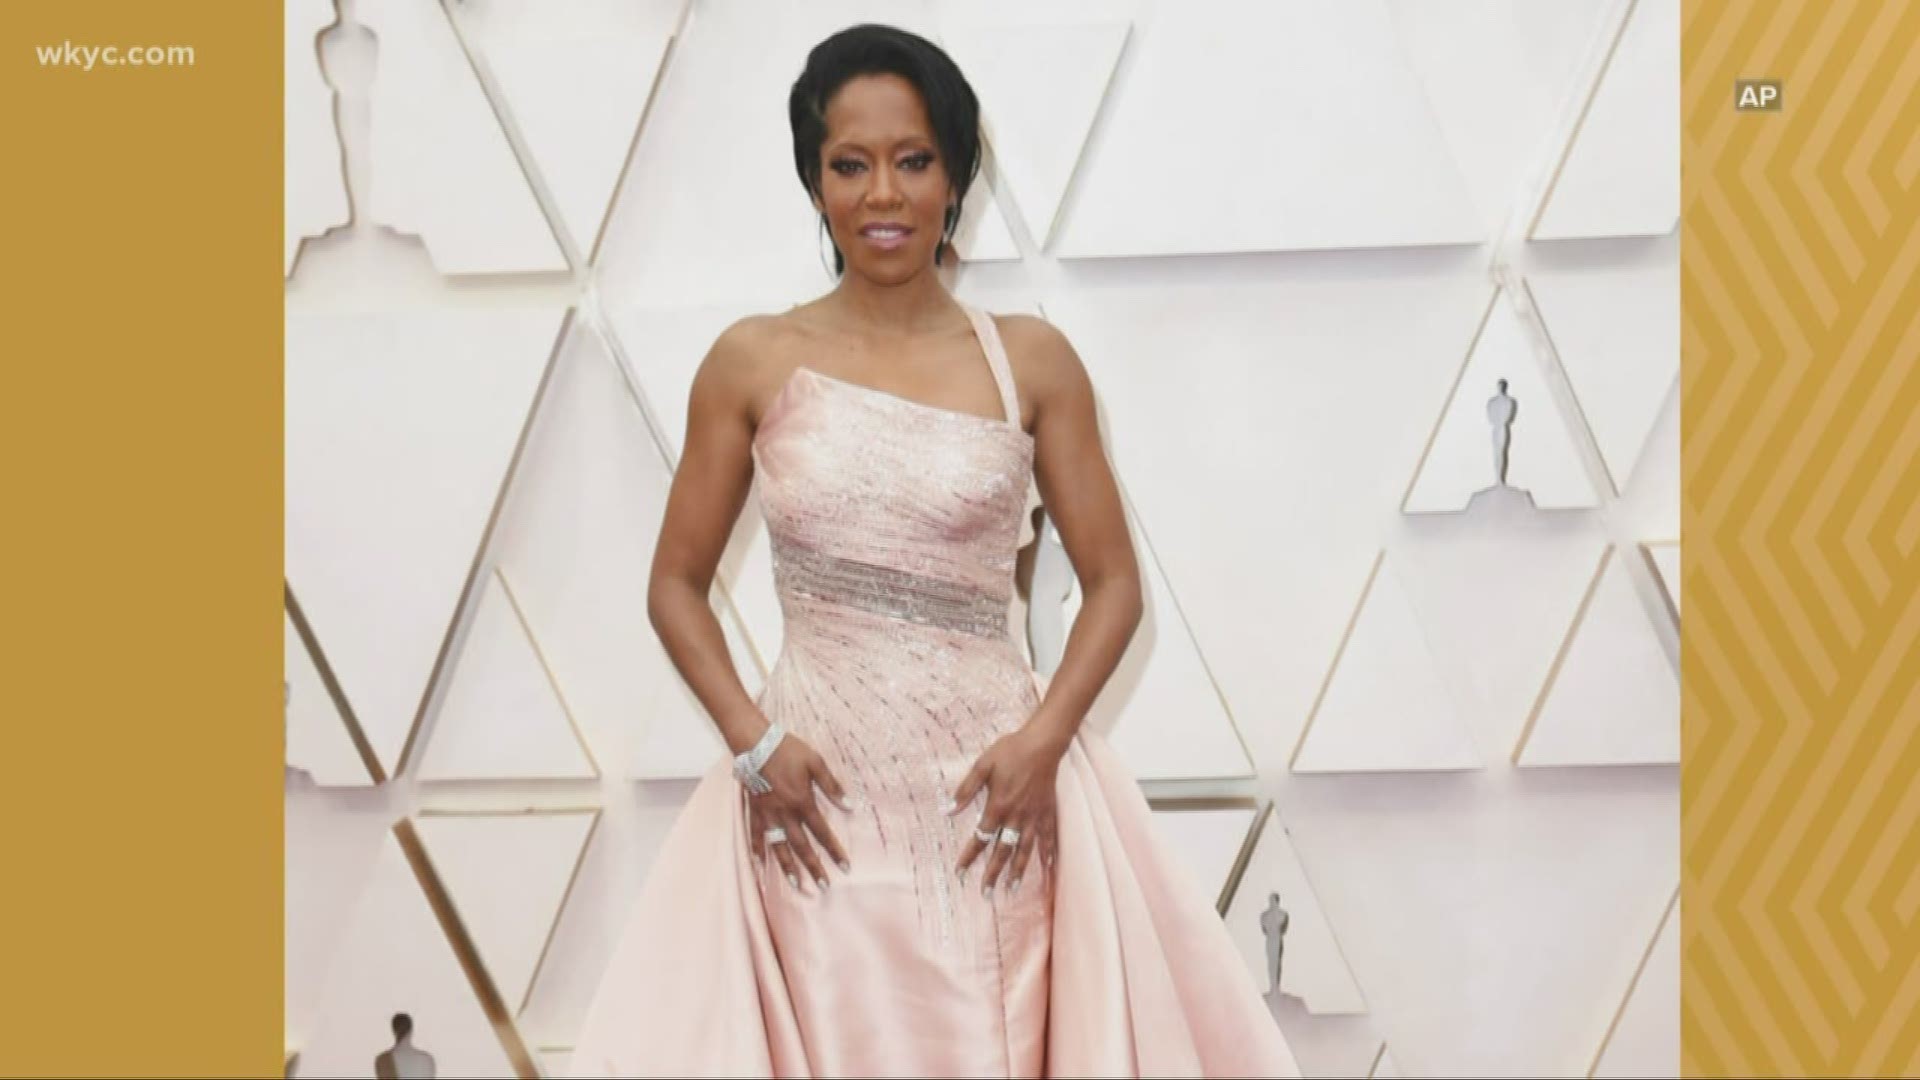 Megan Moran of the Style Foundry in Cleveland shares her thoughts on the best fashion trends from the 2020 Oscars. Among the highlights: Pink and sequins.